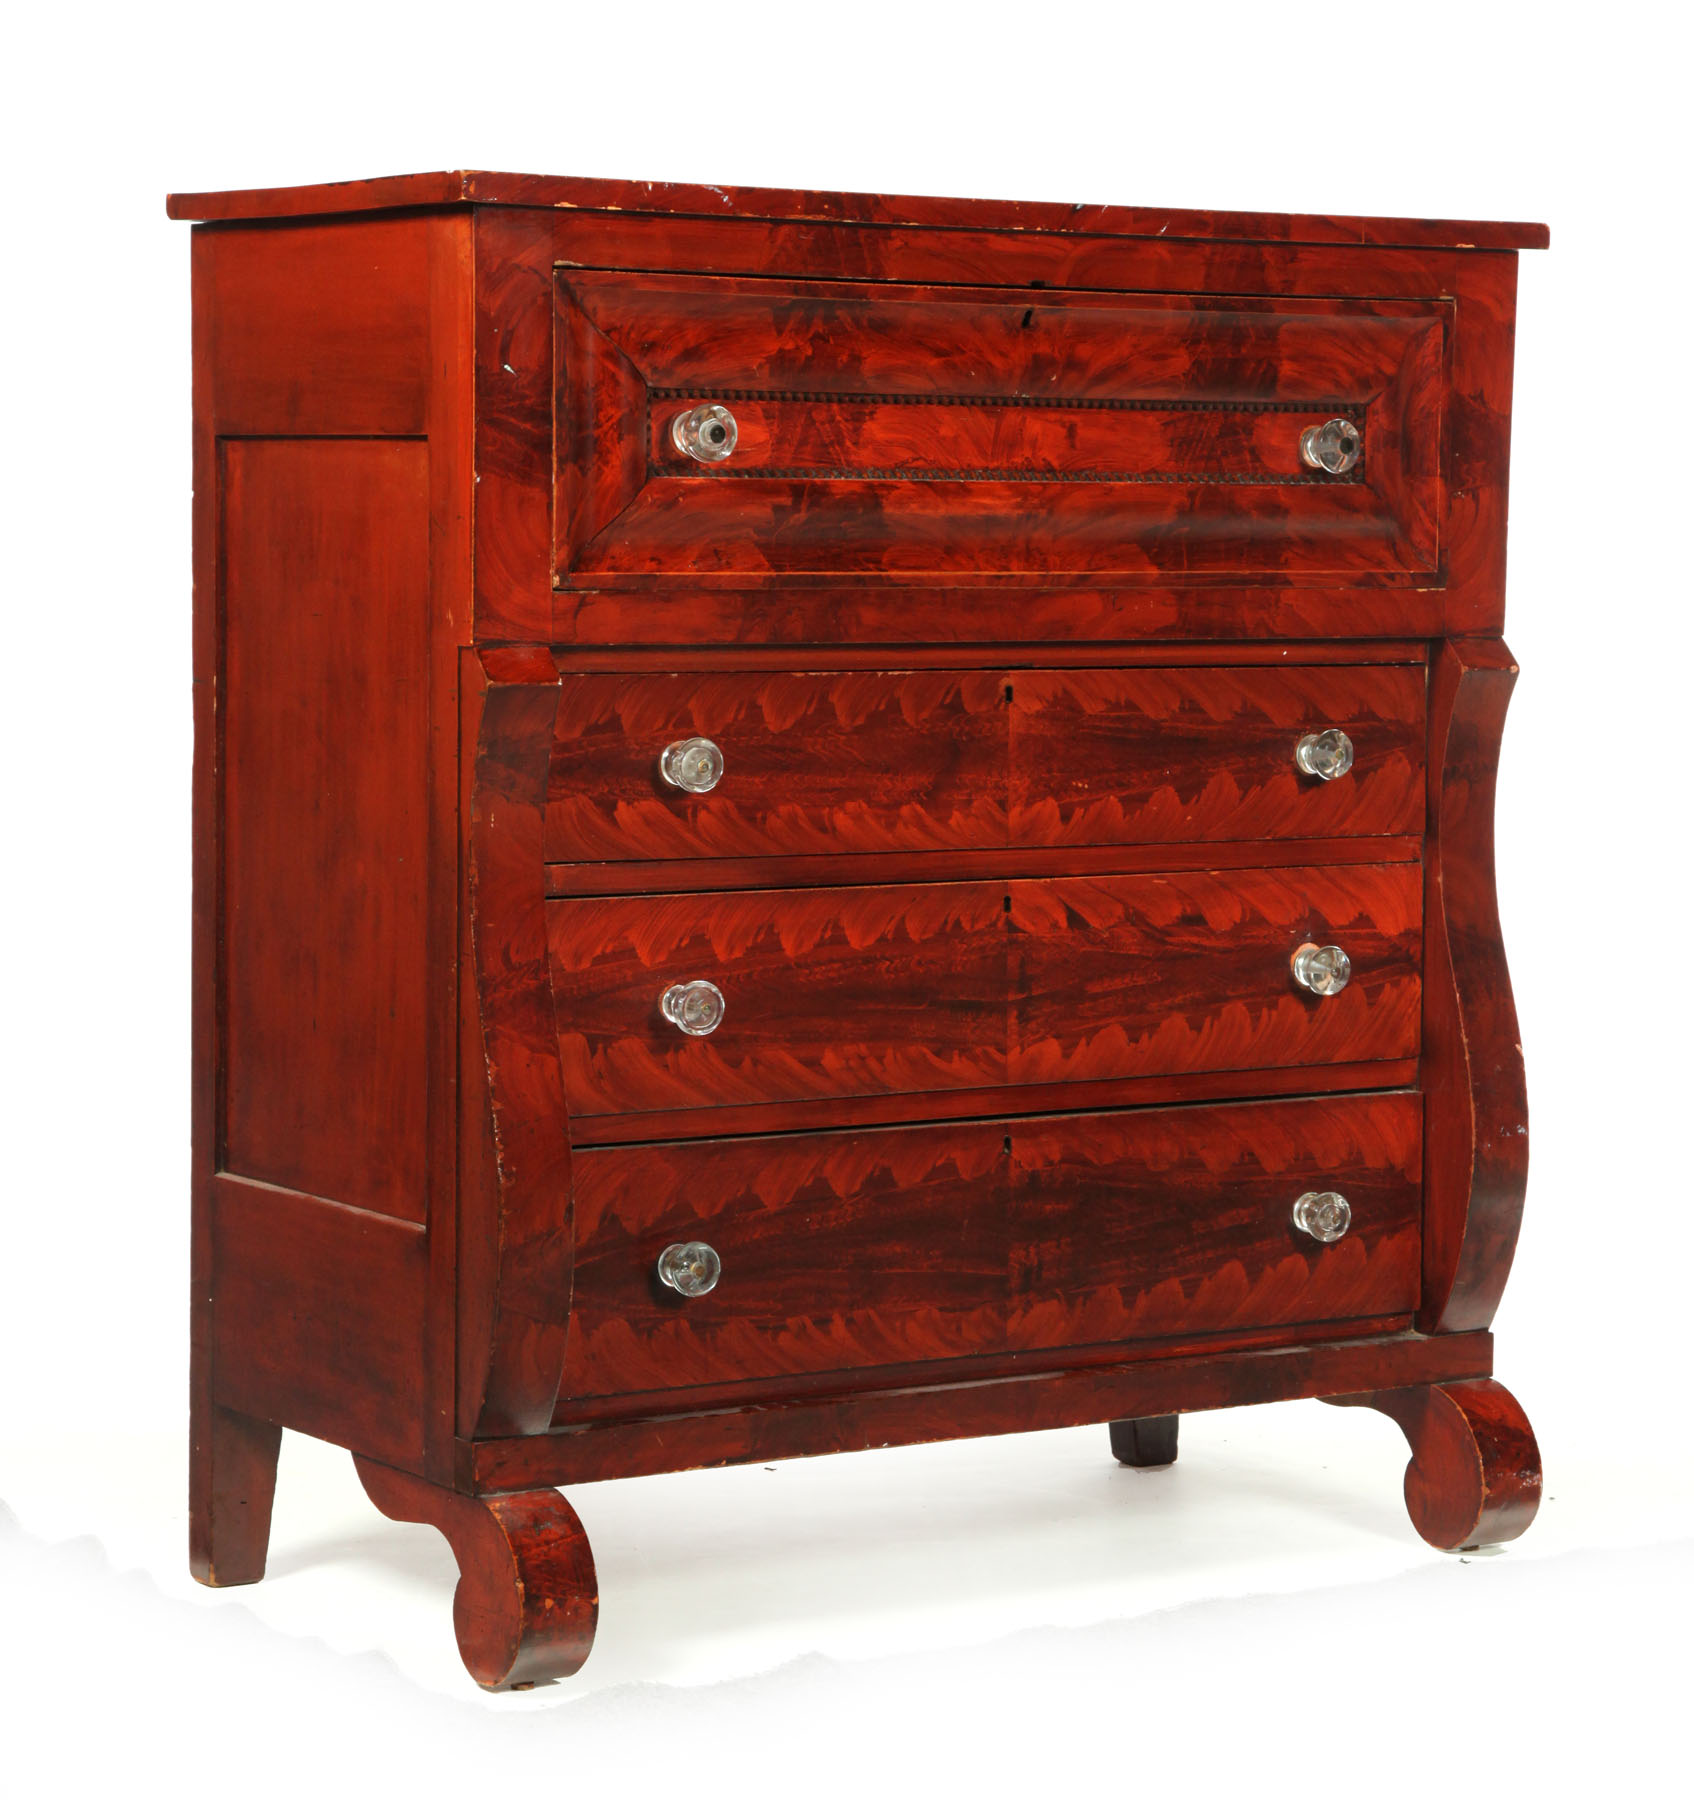 DECORATED CHEST OF DRAWERS.  Attributed